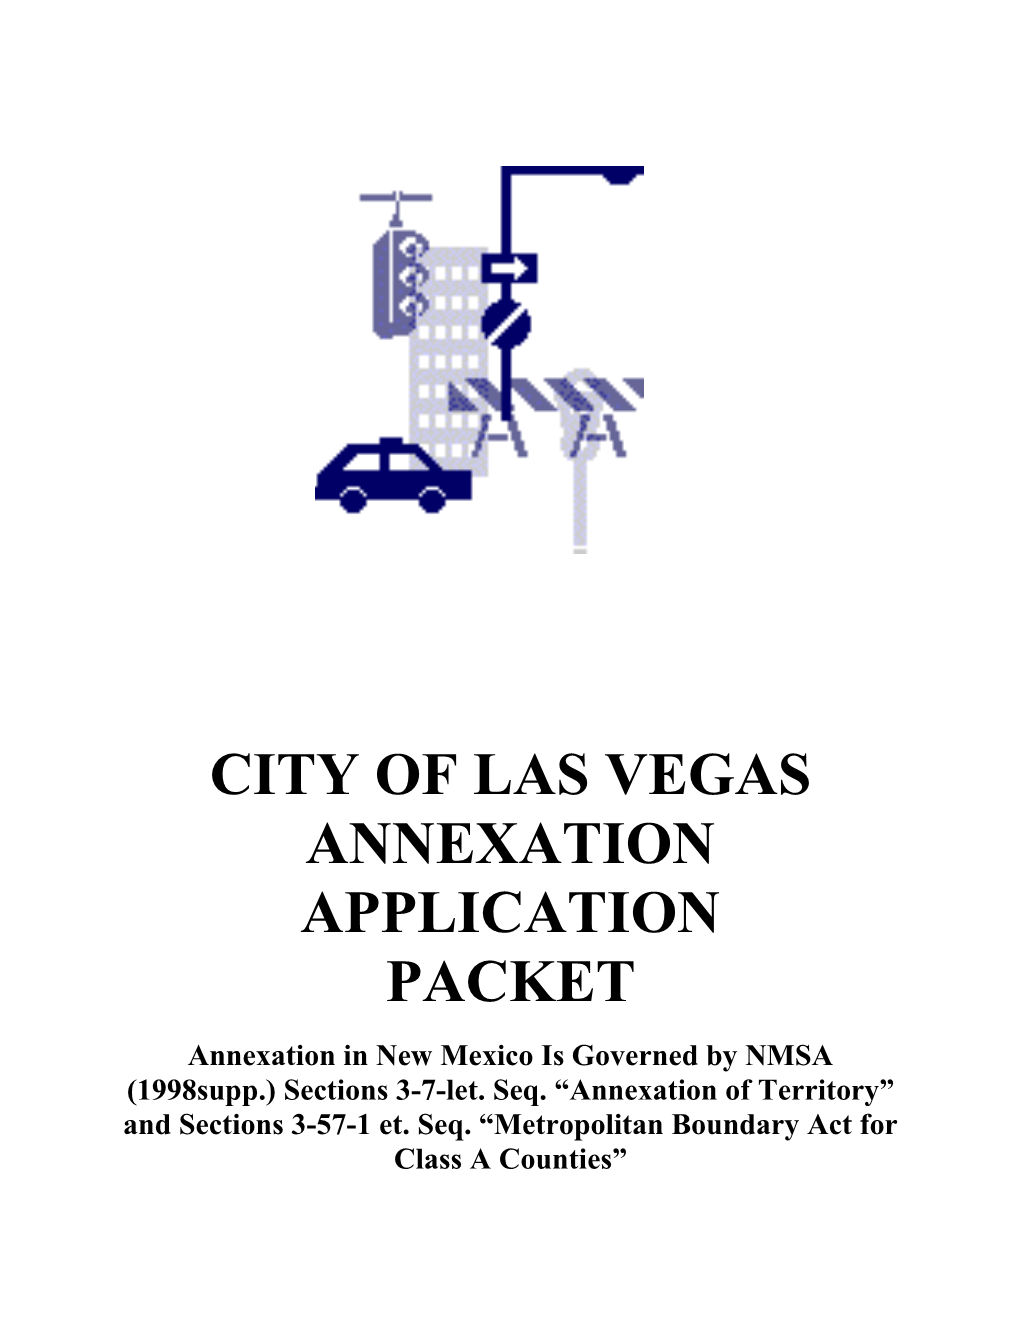 City of Las Vegas Annexation Application Packet